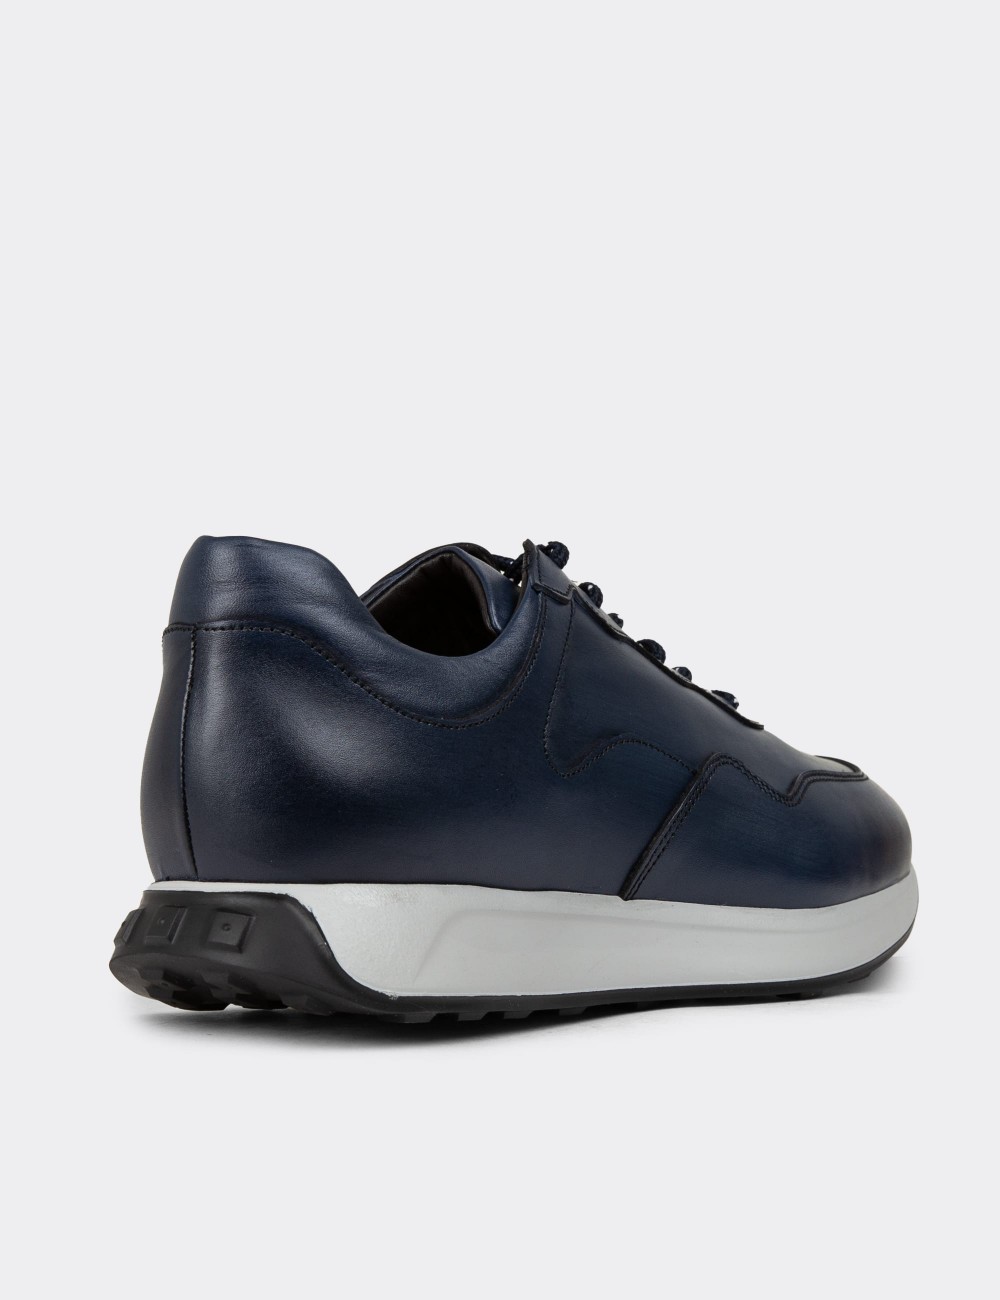 Navy Leather Sneakers - 01725MLCVE06